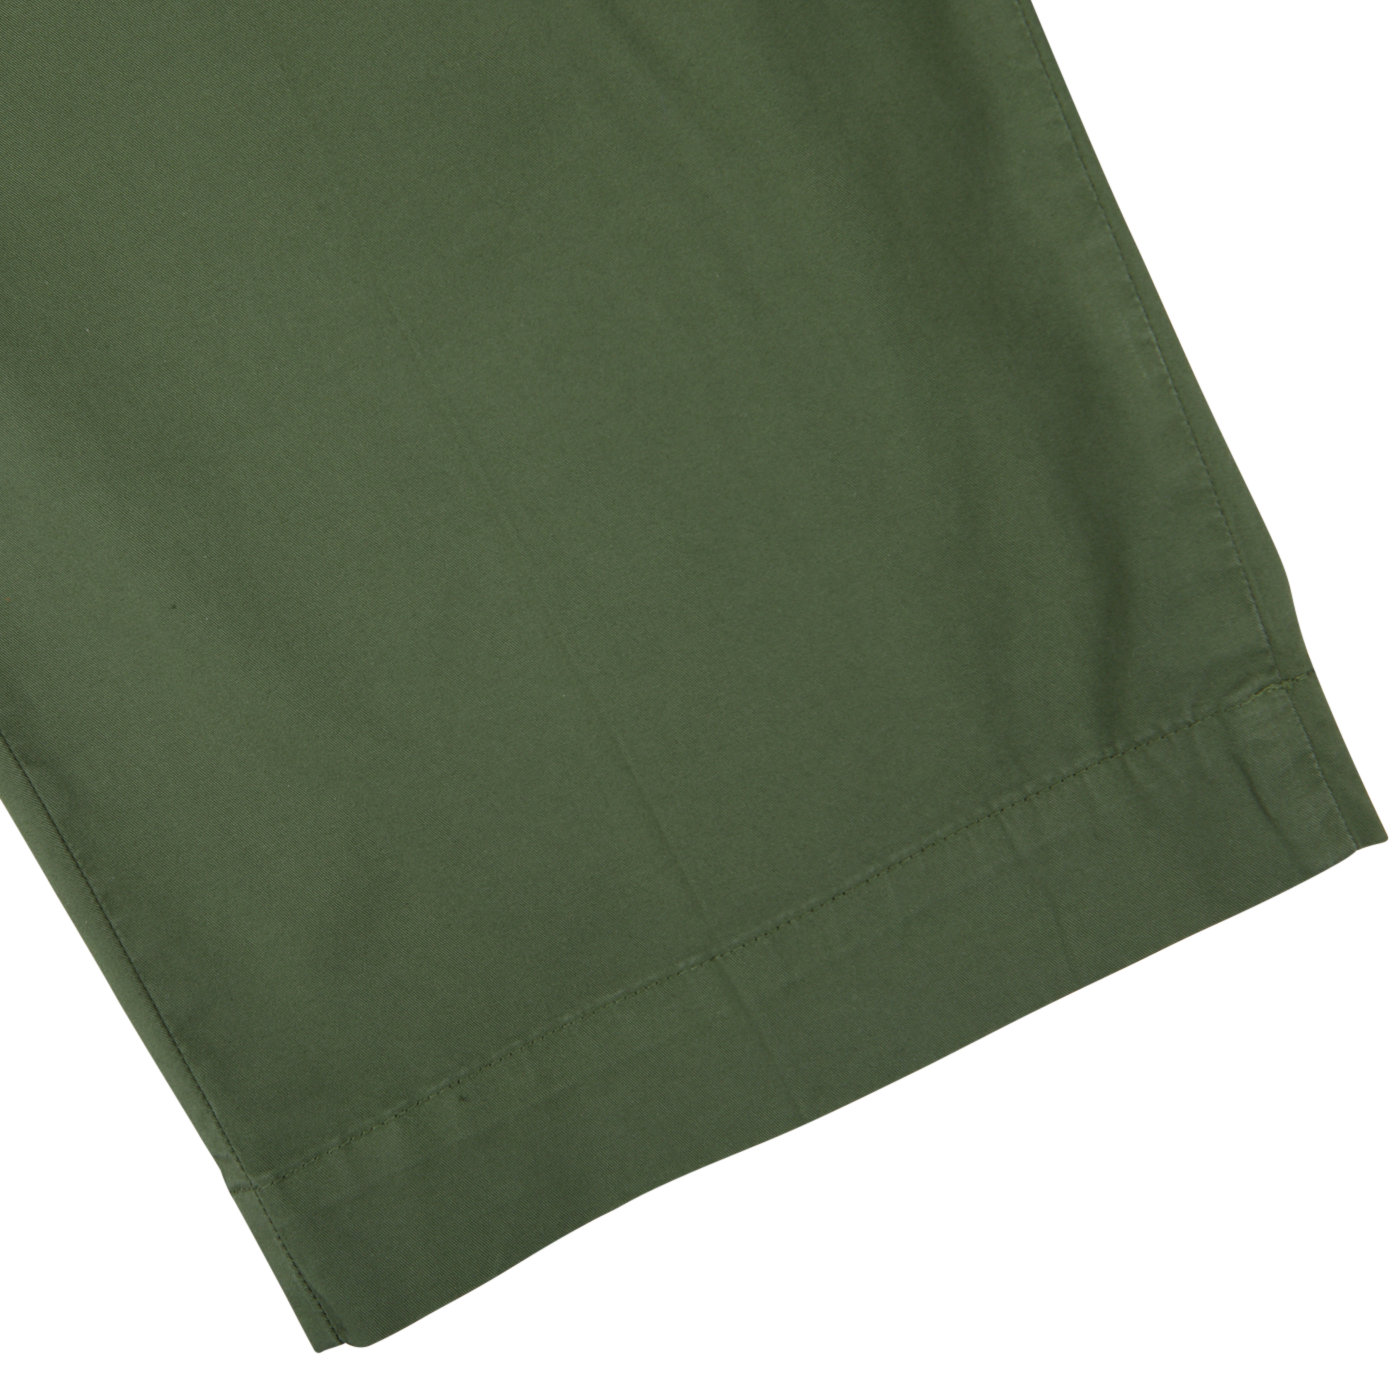 Grass Green Cotton Royal Batavia shorts by Incotex with a hem on a white background.